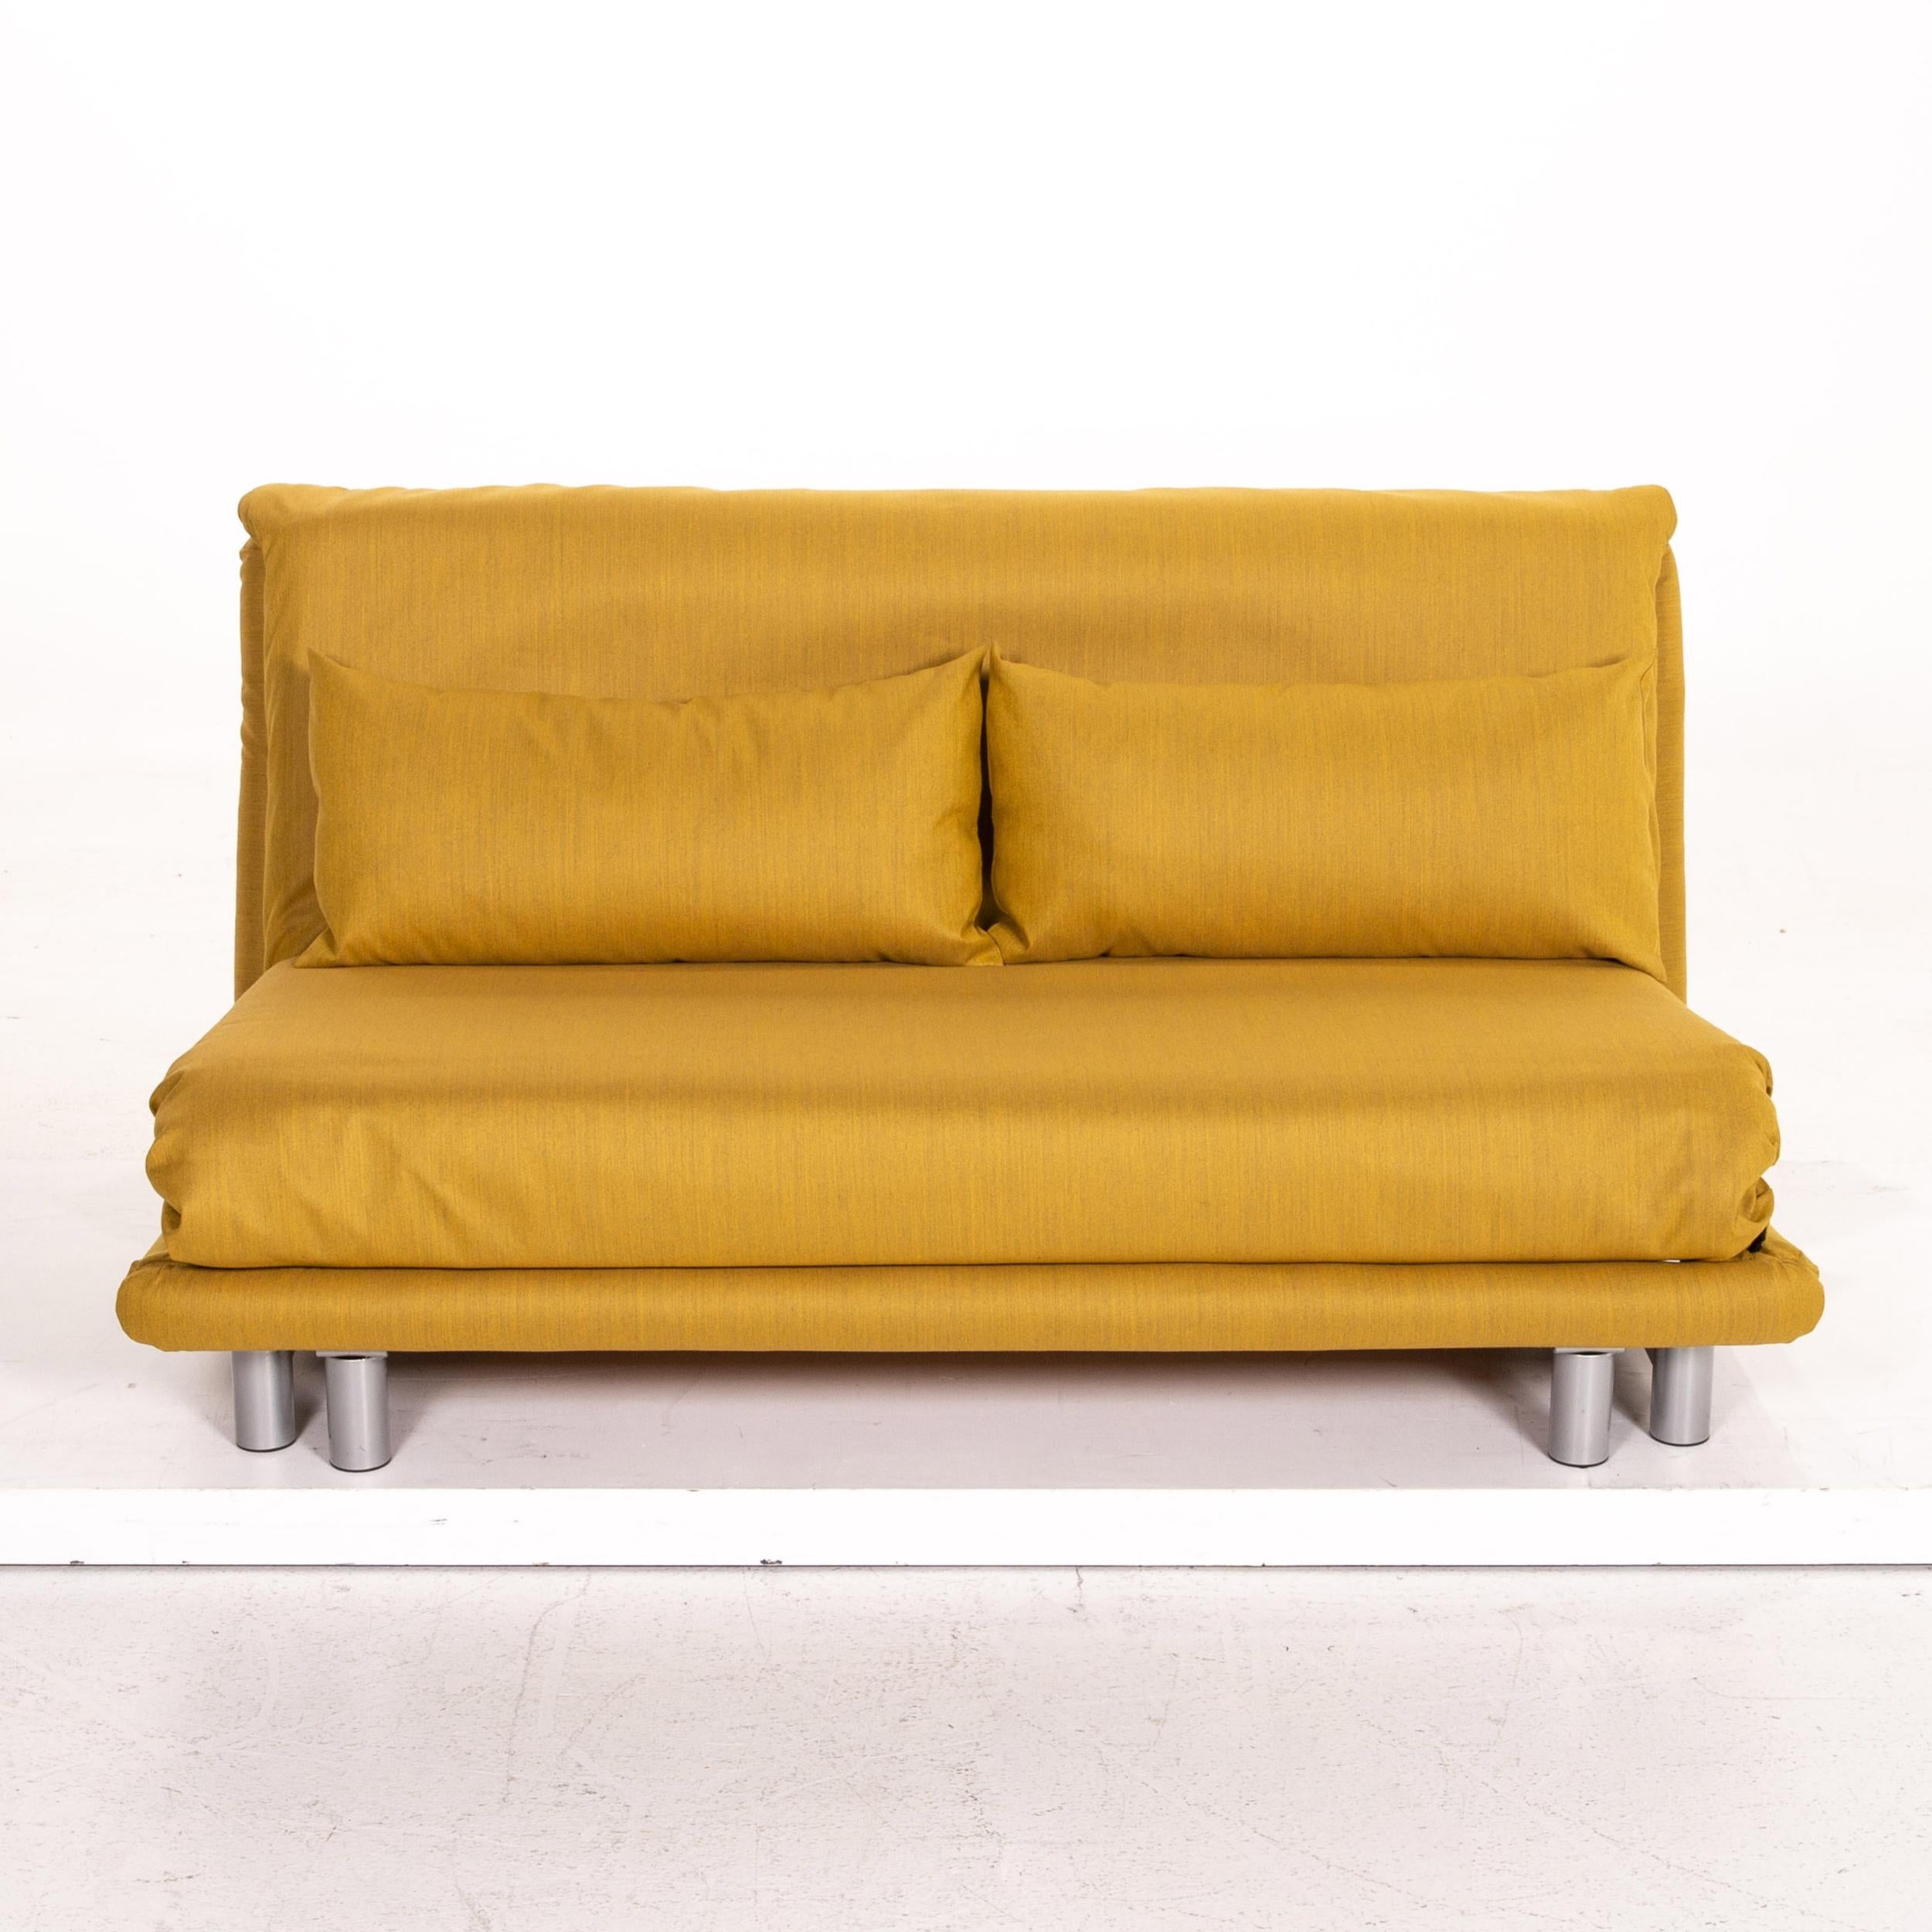 Contemporary Ligne Roset Multy Fabric Sofa Bed Yellow Two-Seat Sofa Sleep Function Couch